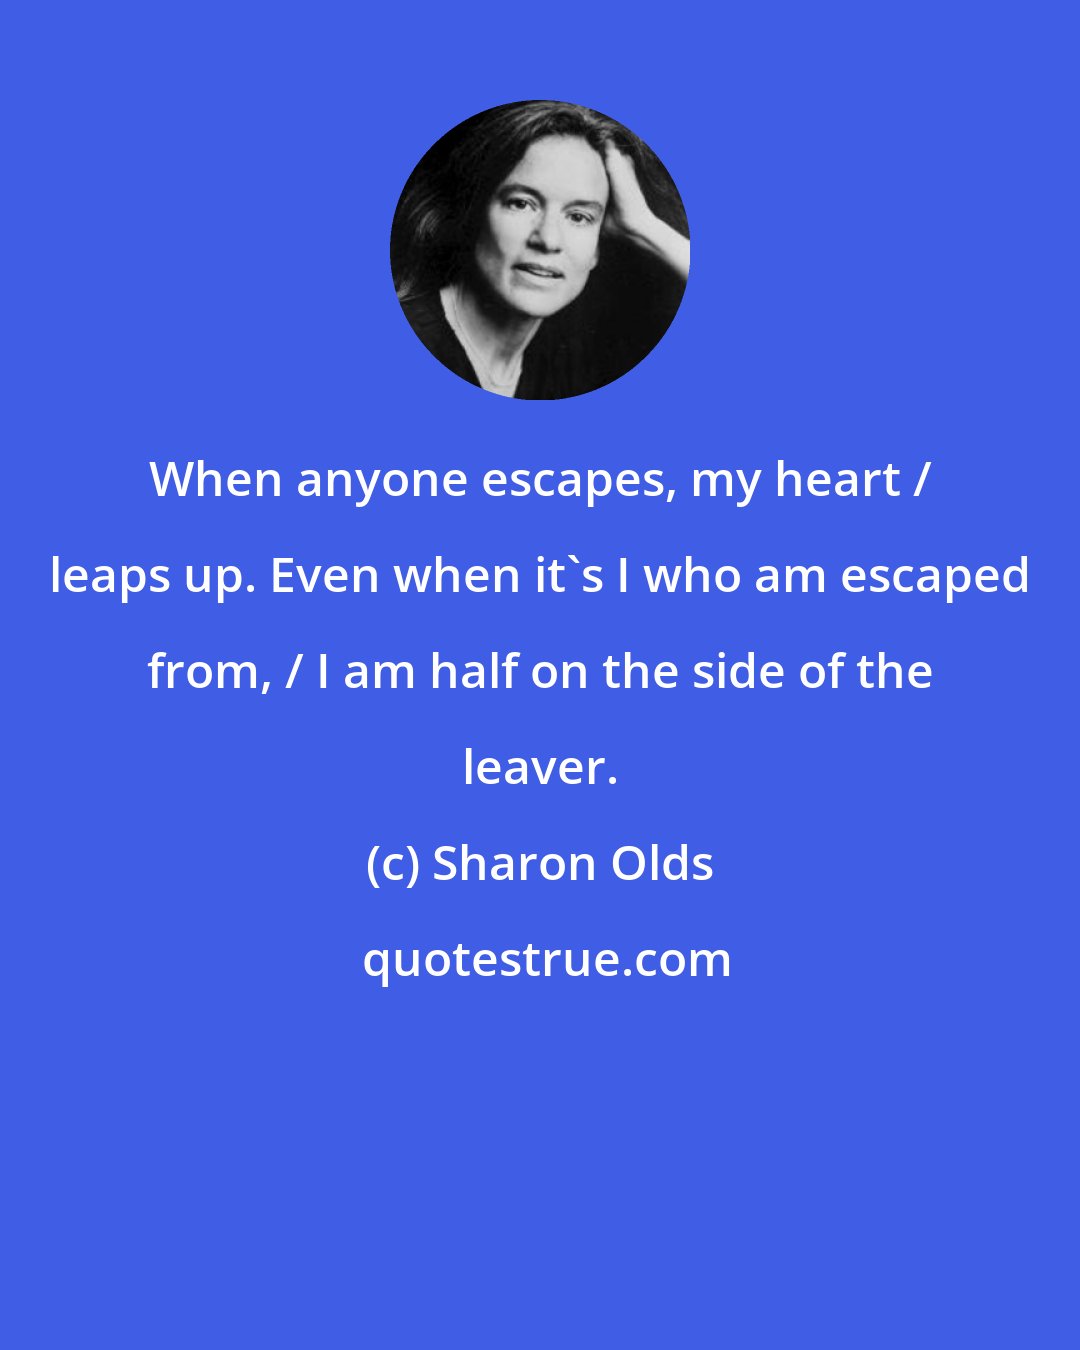 Sharon Olds: When anyone escapes, my heart / leaps up. Even when it's I who am escaped from, / I am half on the side of the leaver.